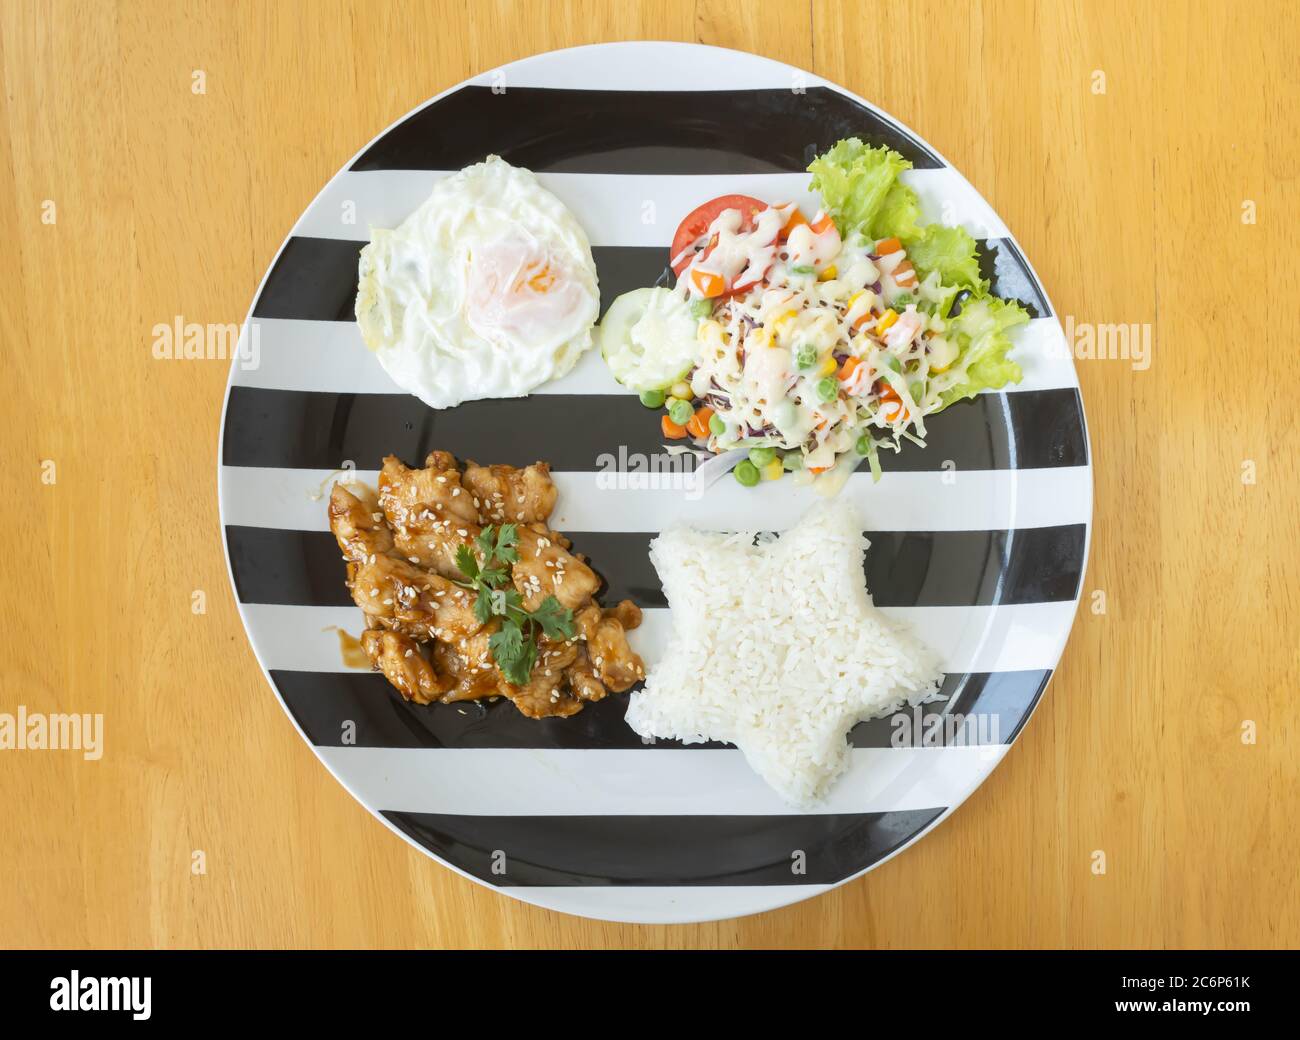 Fried Chicken with Garlic and Pepper and Fried Egg and Vegan Salad and Rice in Dish on Wood Table with Natural Light on Flatlay View Stock Photo